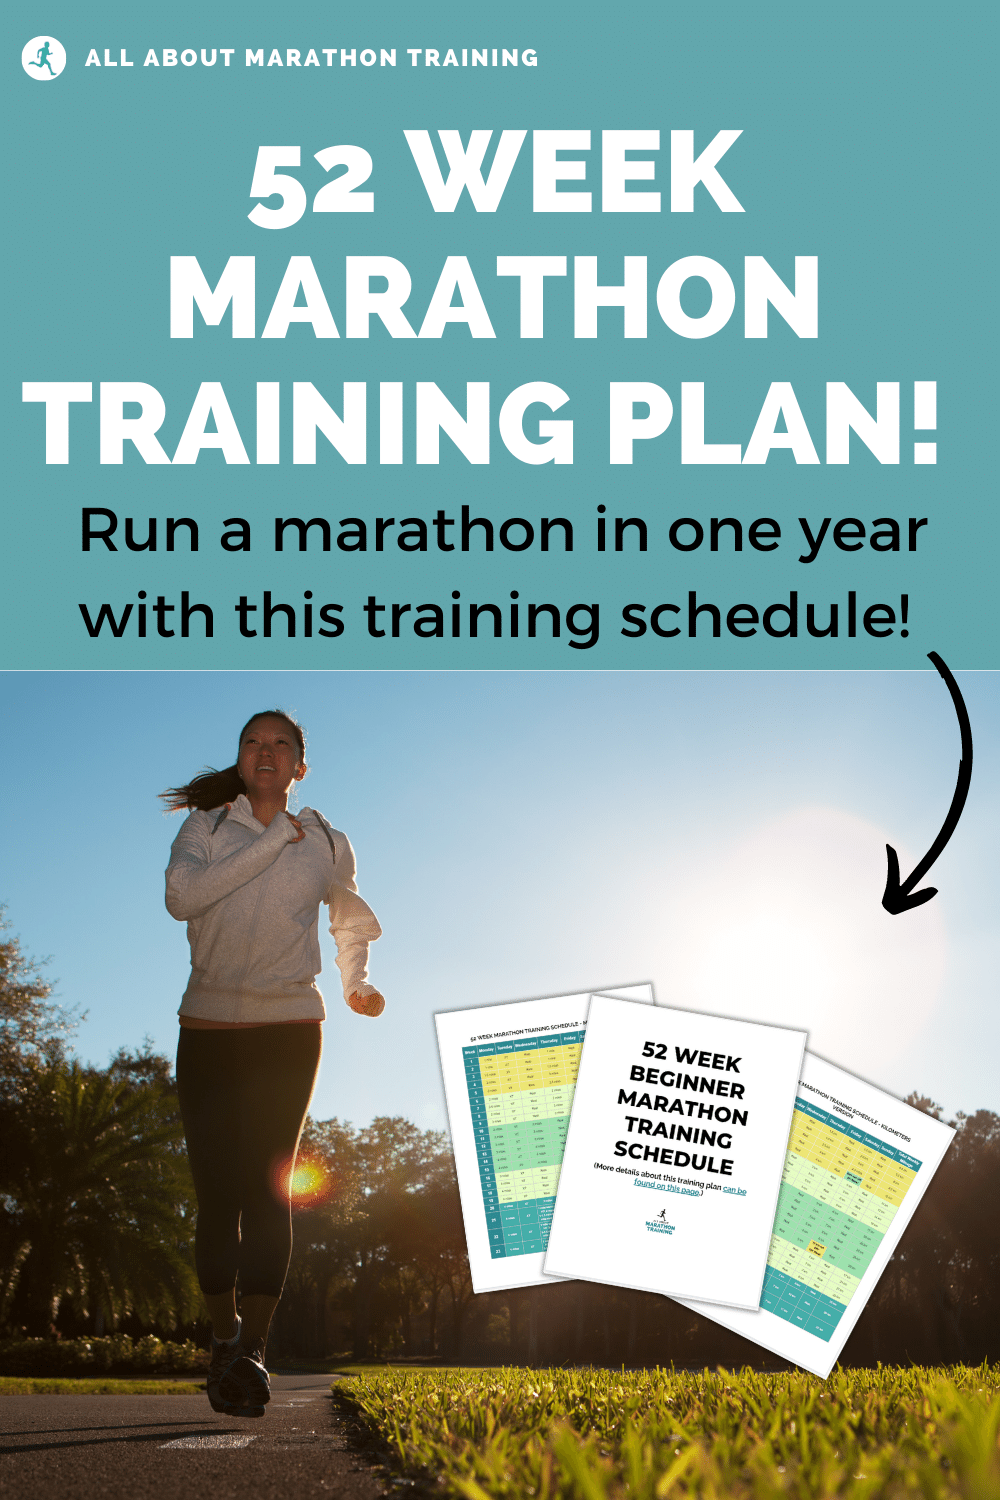 Run a marathon in one year with this training plan